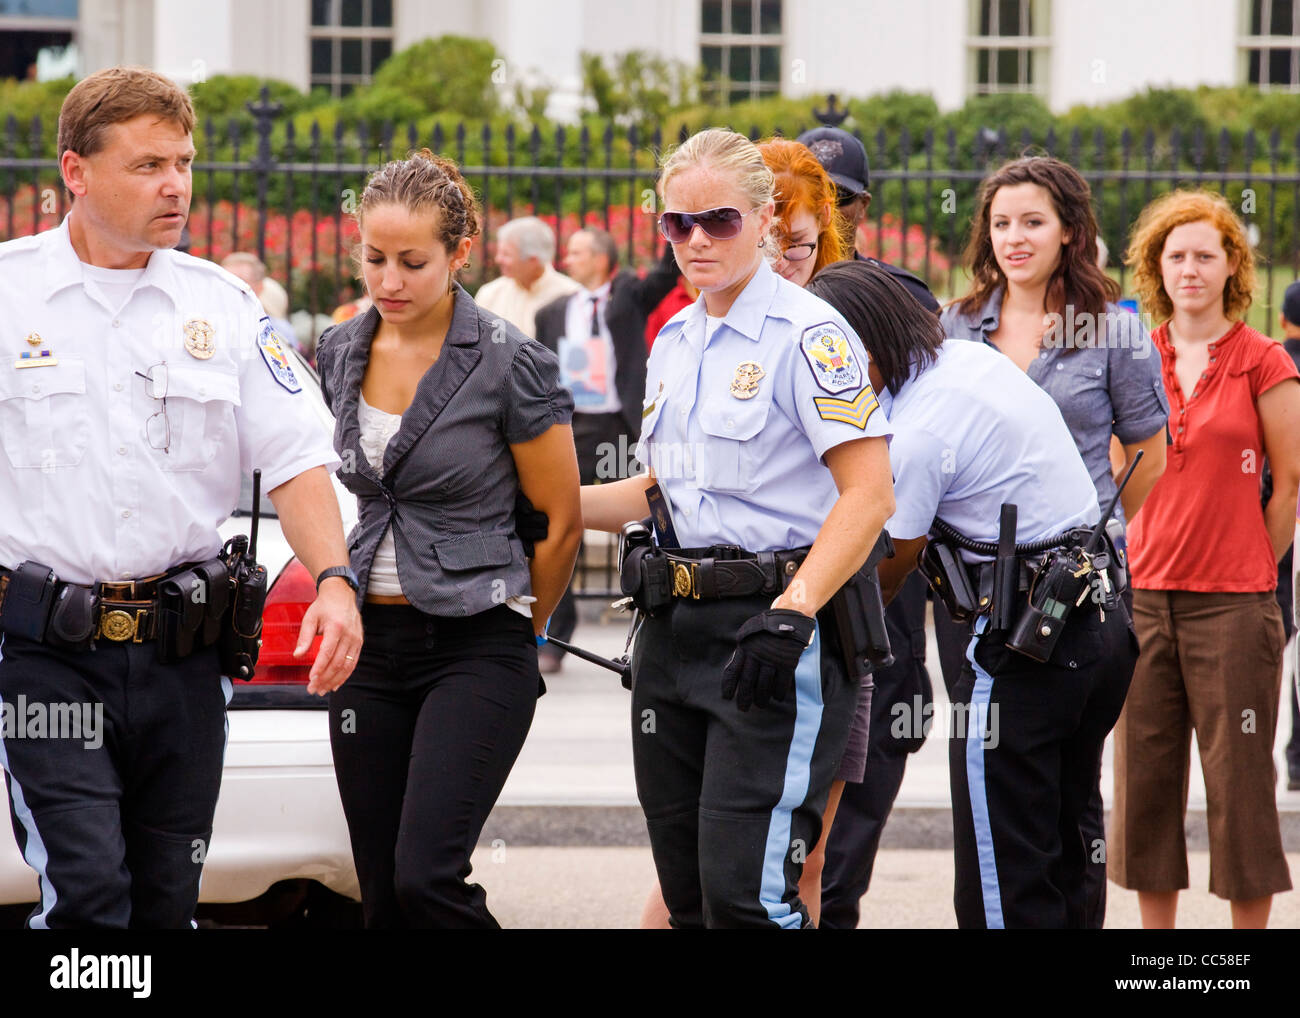 A young female protester is handcuffed and detained for protesting in front of the White House - Washington, DC USA Stock Photo